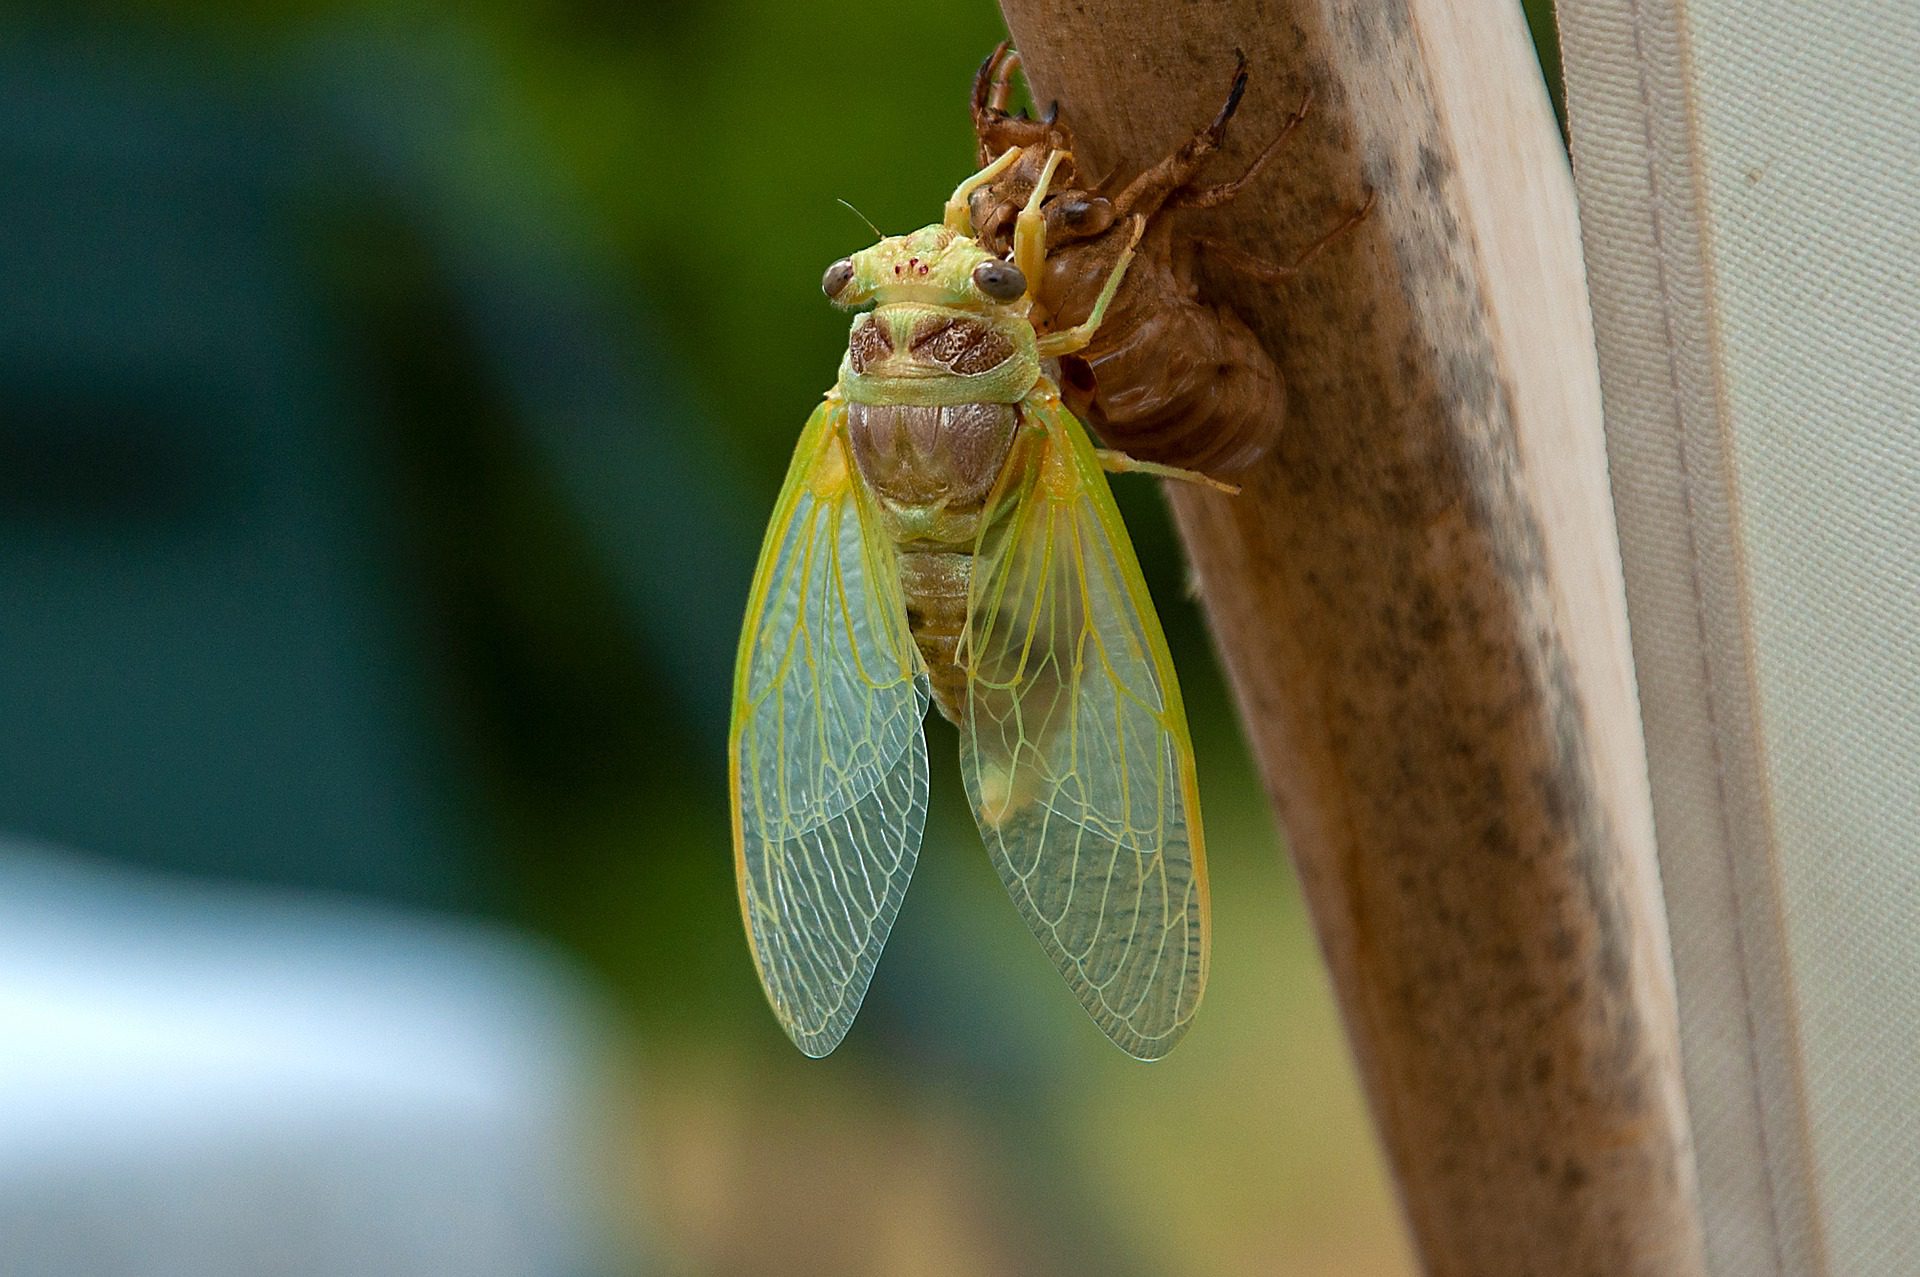 Cicada that just emerged from its exoskeleton.